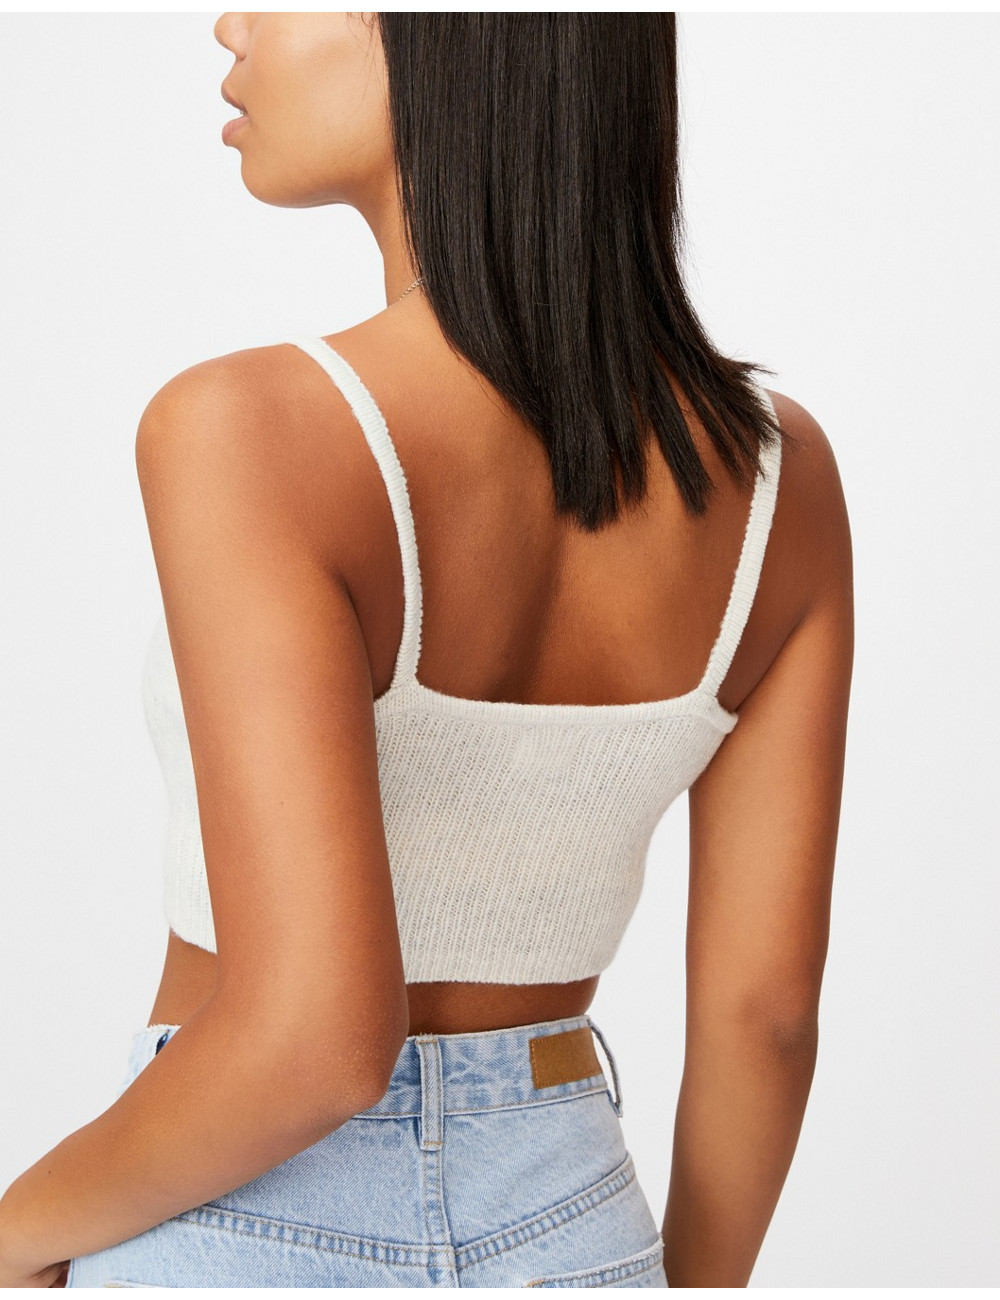 Cotton:On baby rib cami in...